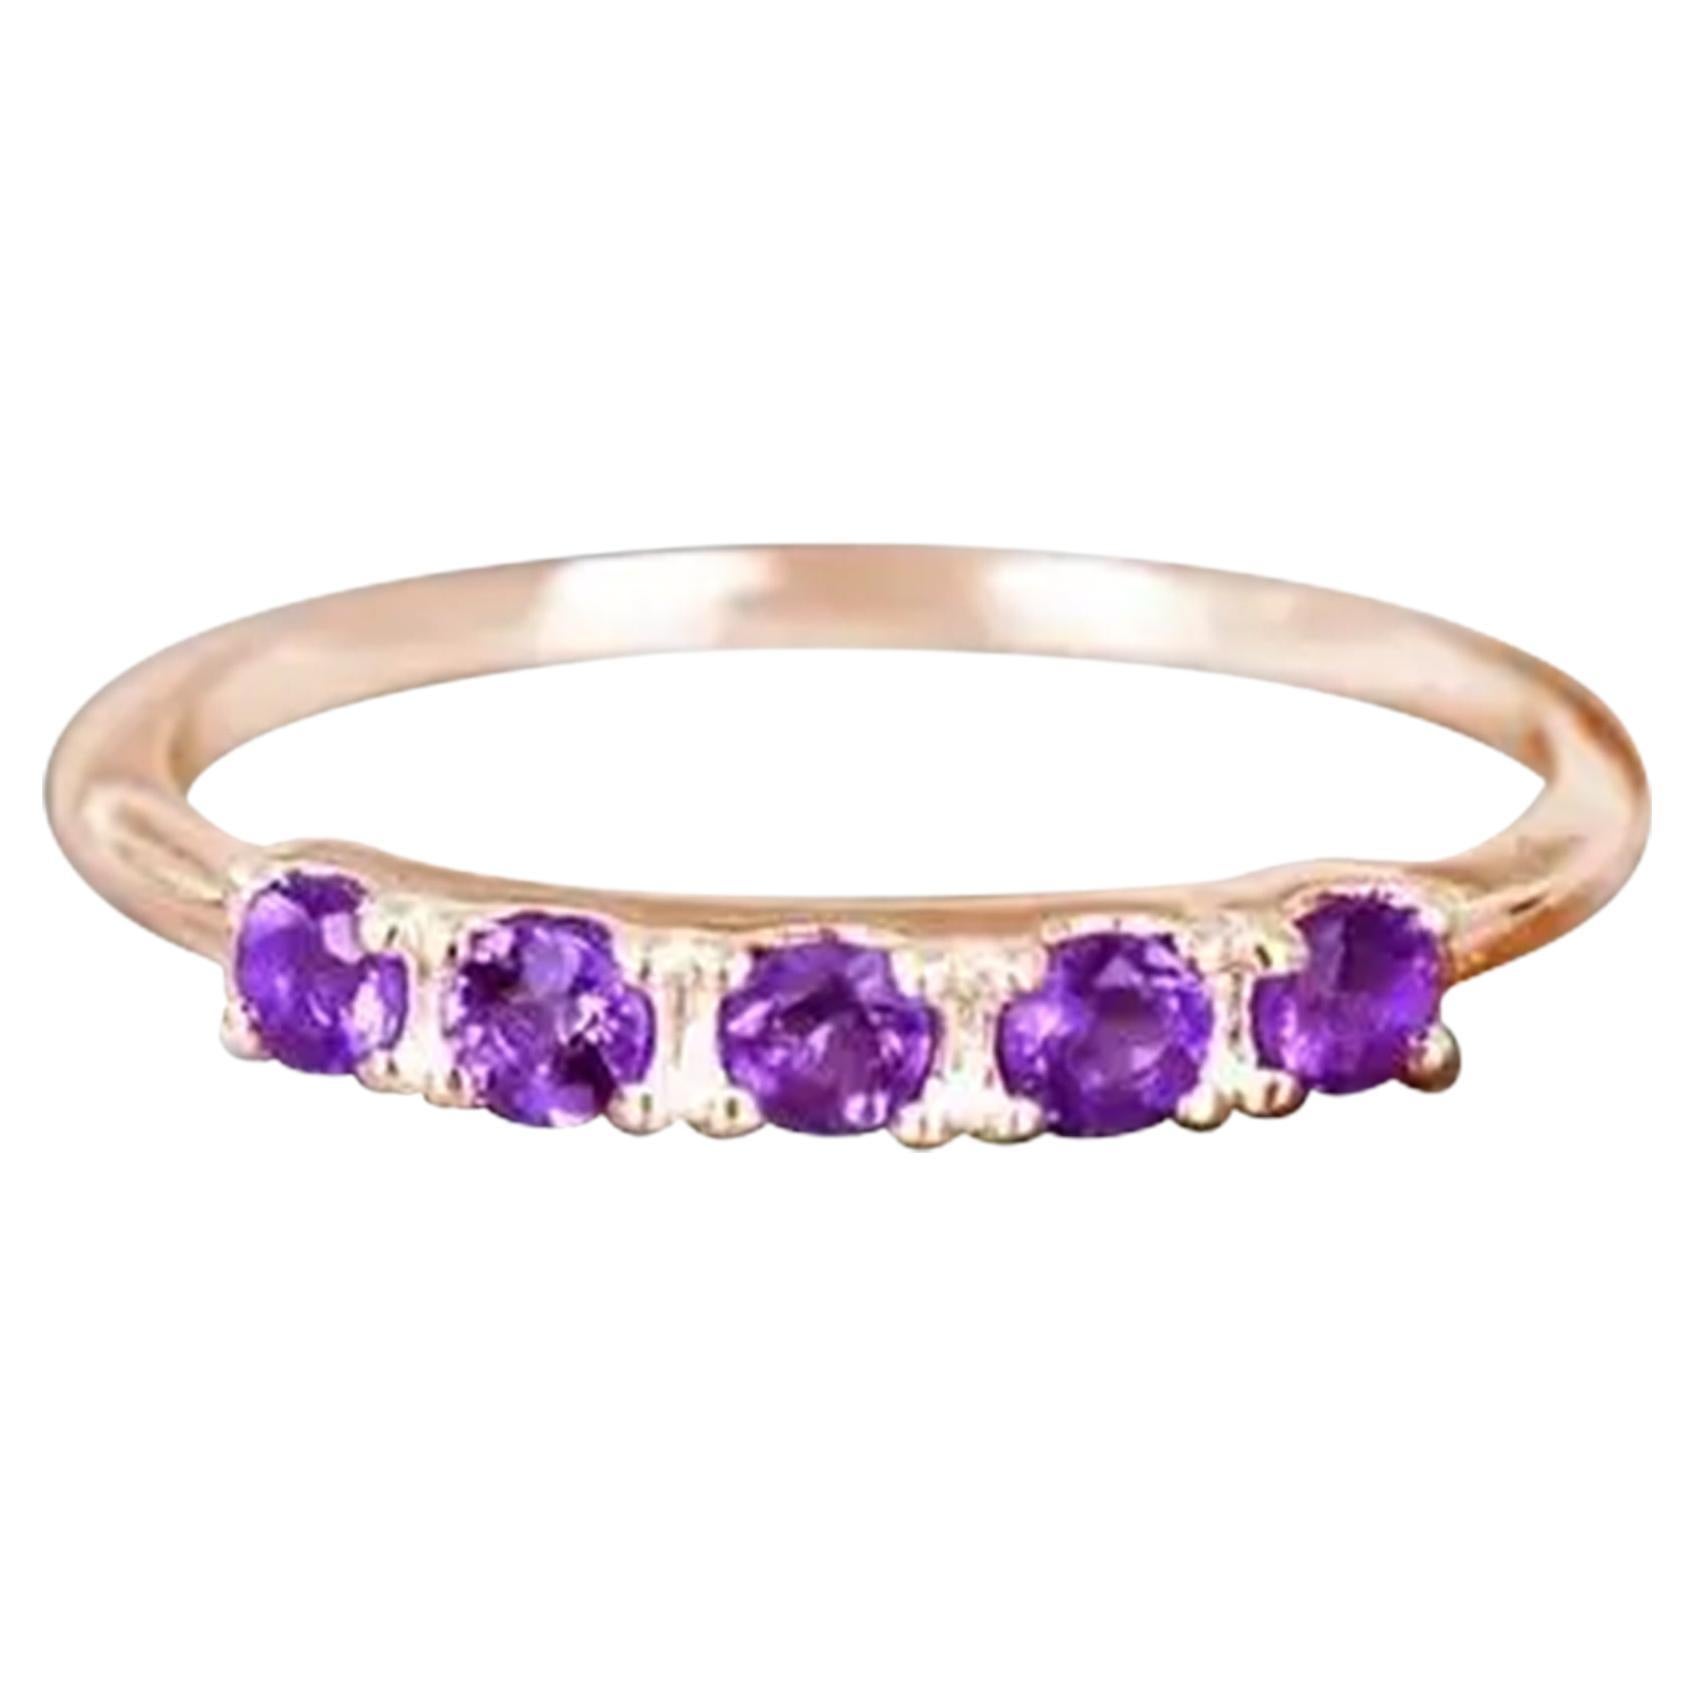 For Sale:  10k Gold Multiple Gemstone Ring Birthstone Ring Stackable Ring